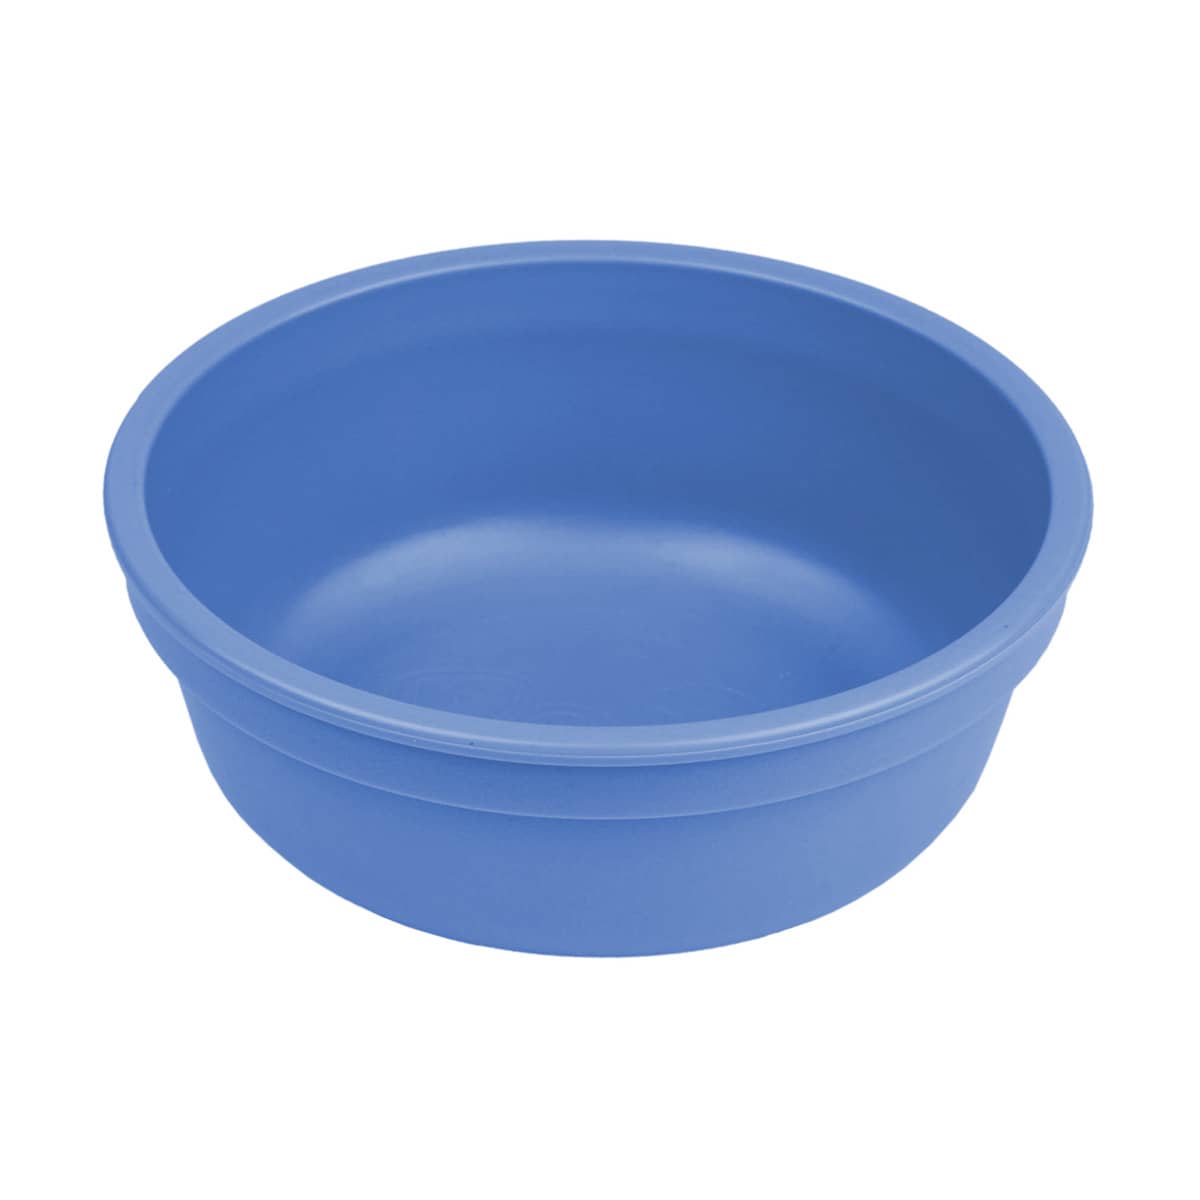 Re-Play Recycled Bowl - Naturals Collection - Denim